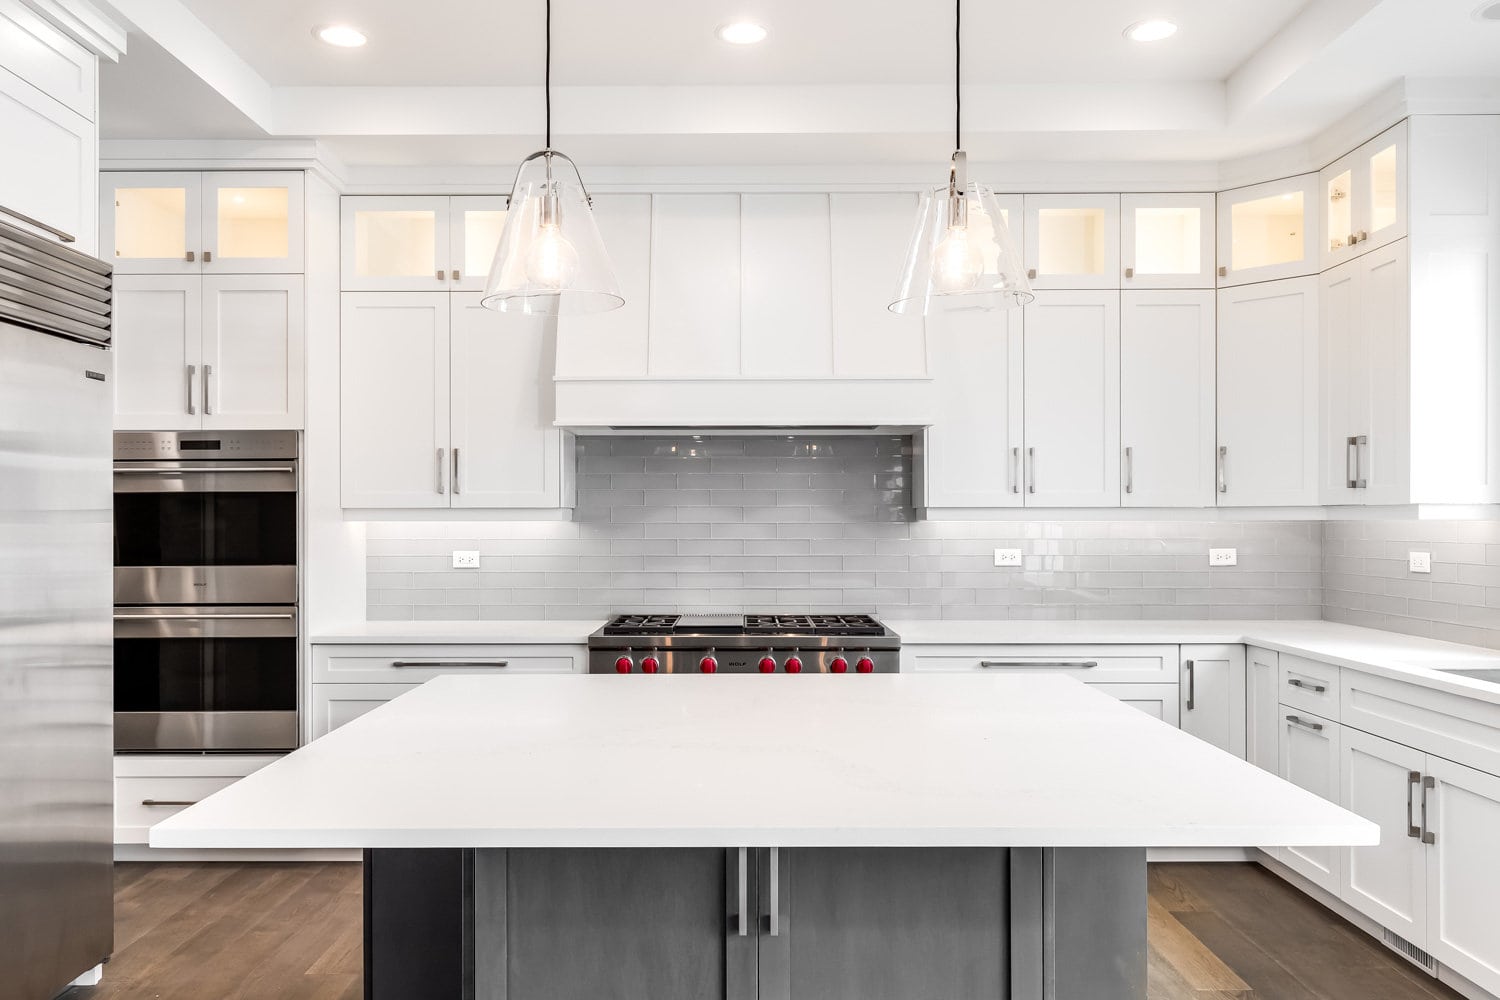 A luxurious modern kitchen with stainless steel Wolf appliances surrounded by white cabinets, beautiful granite, and hardwood floors.